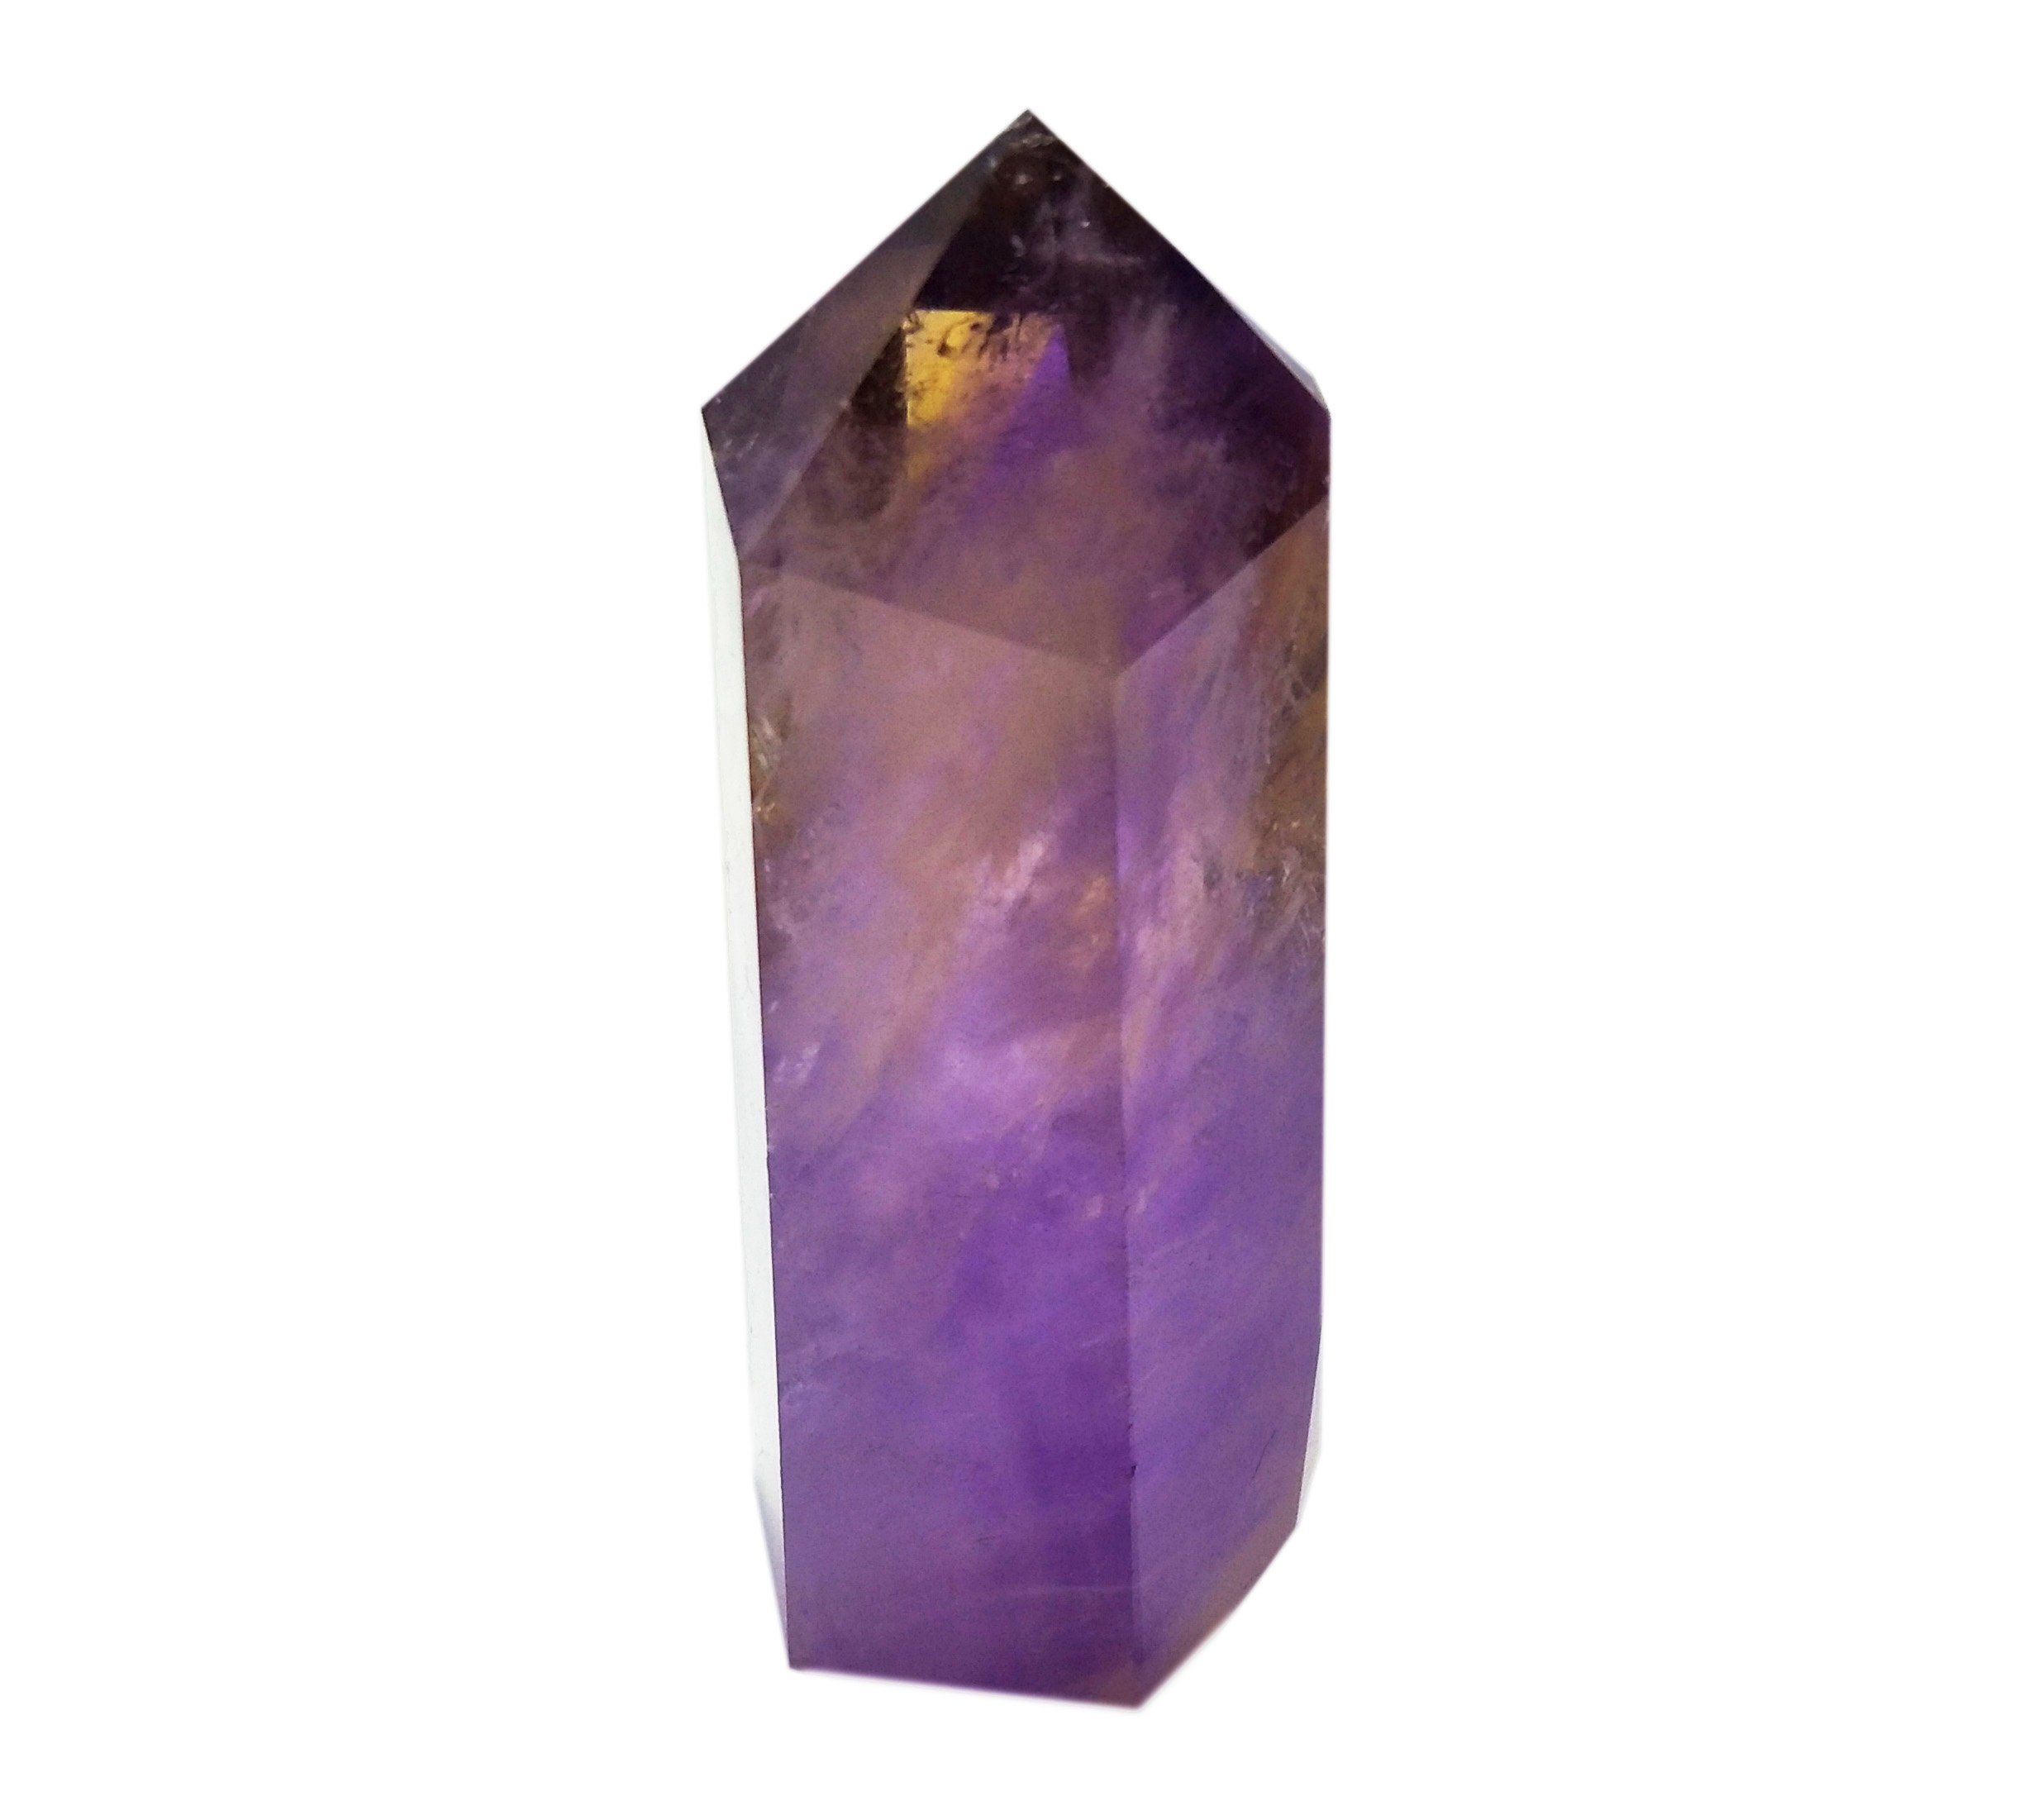 Mina Heal Amethyst Healing Crystal Wand Pointed Faceted Prism Bar For Reiki Chakra Meditation Therapy Deco, Small Gemstomes Are Gifts (Col